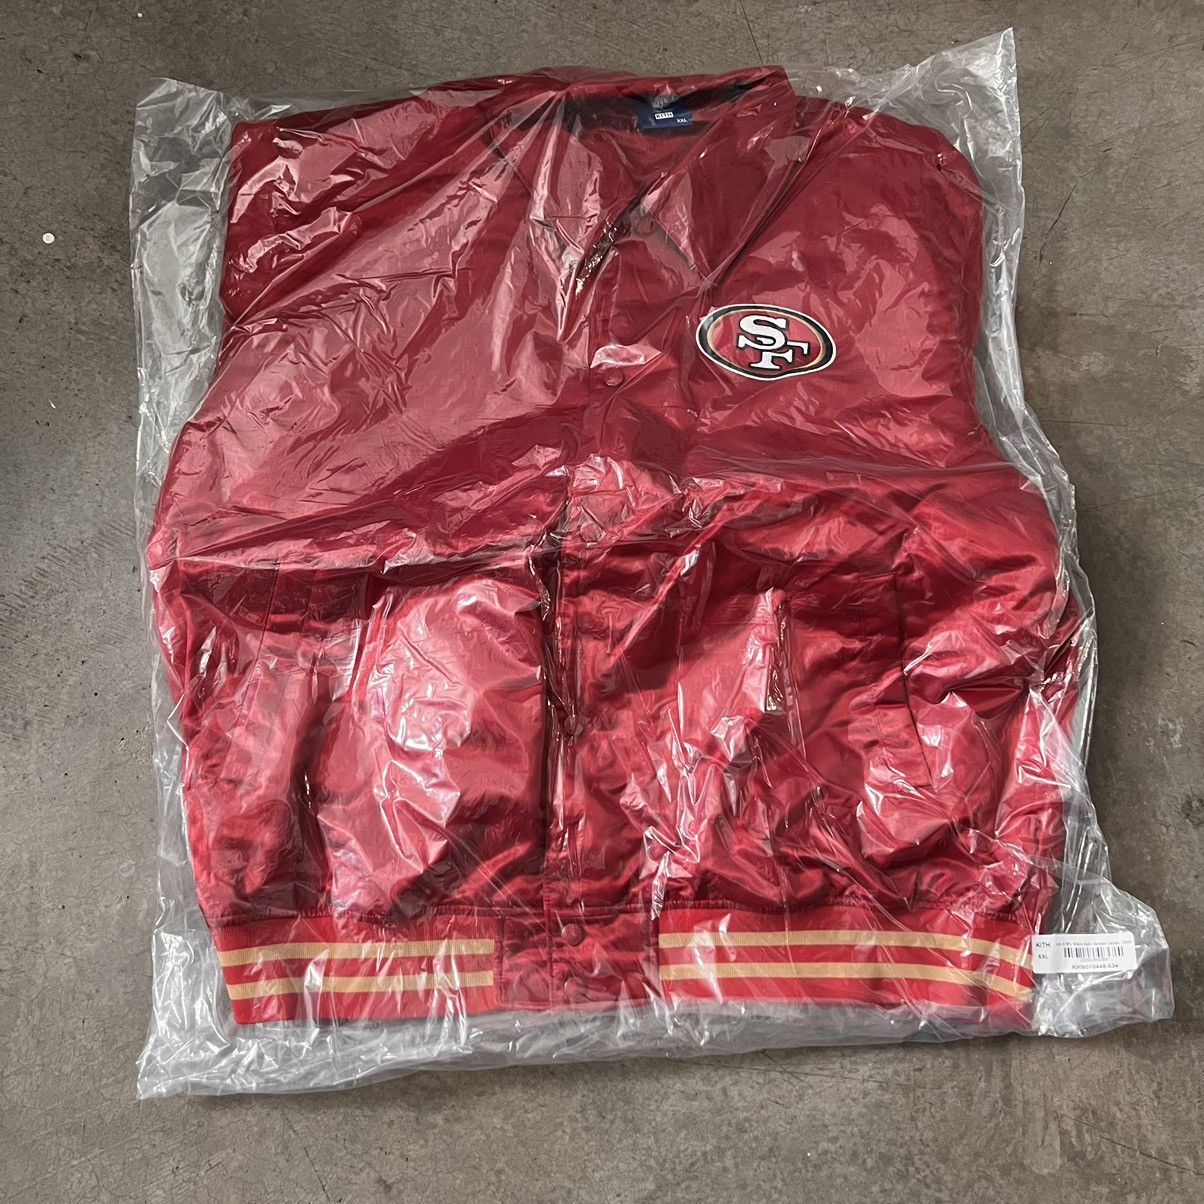 Kith for The NFL: Lions Satin Bomber Jacket - Chain XS